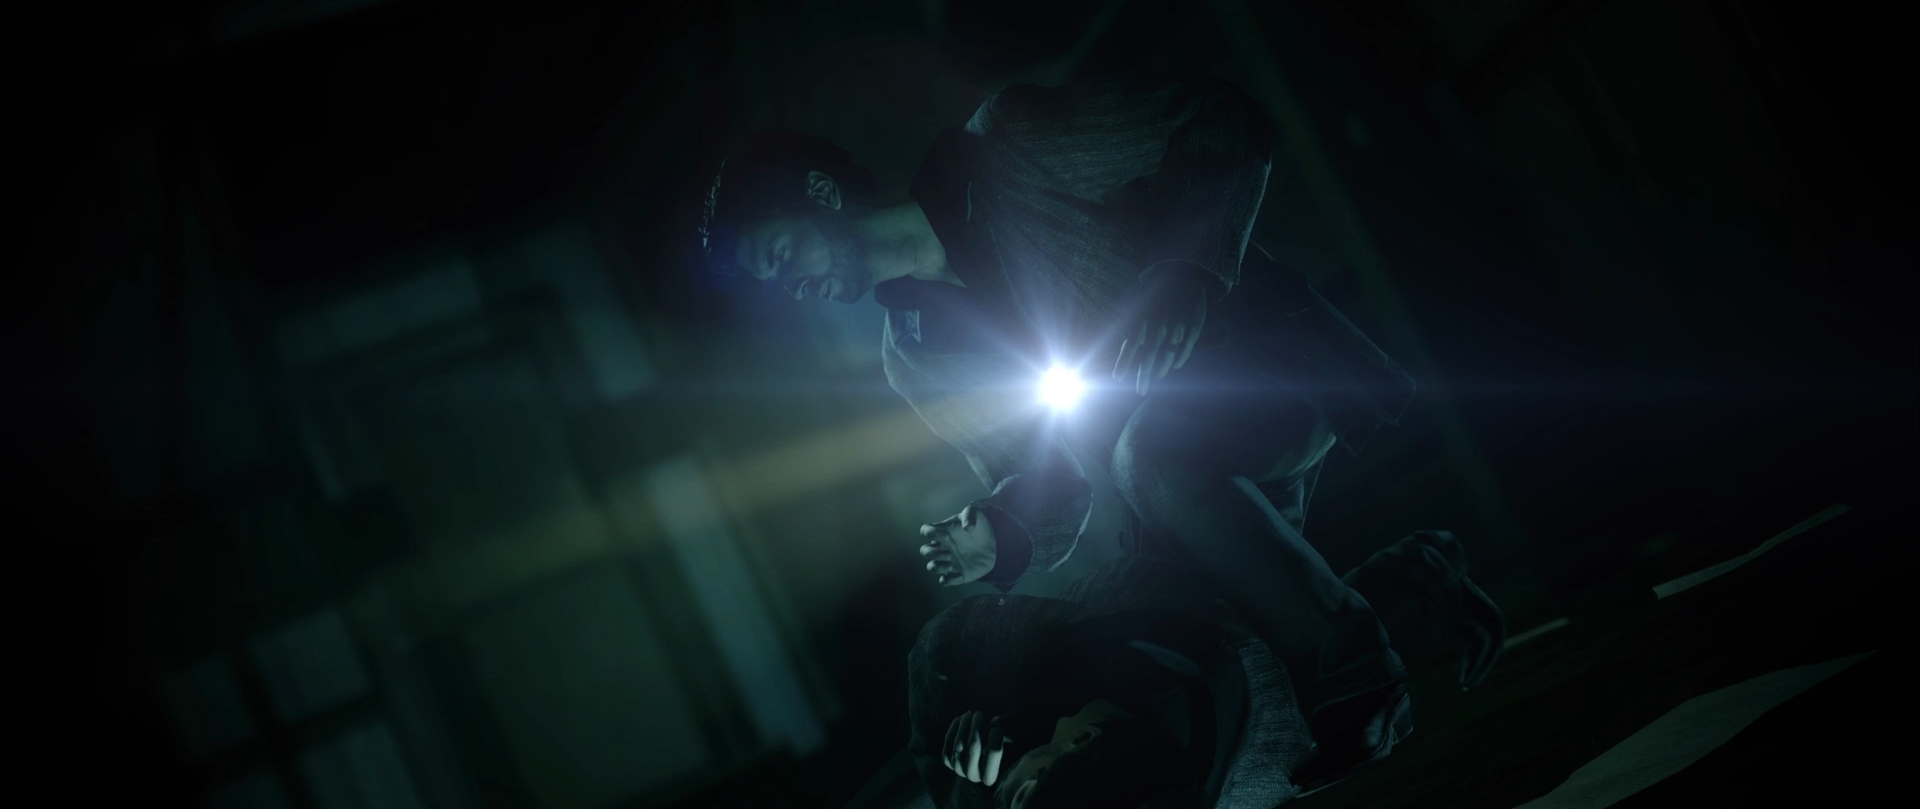 Alan Wake 2: Release Date, Differences From The Original, DLC & Pricing